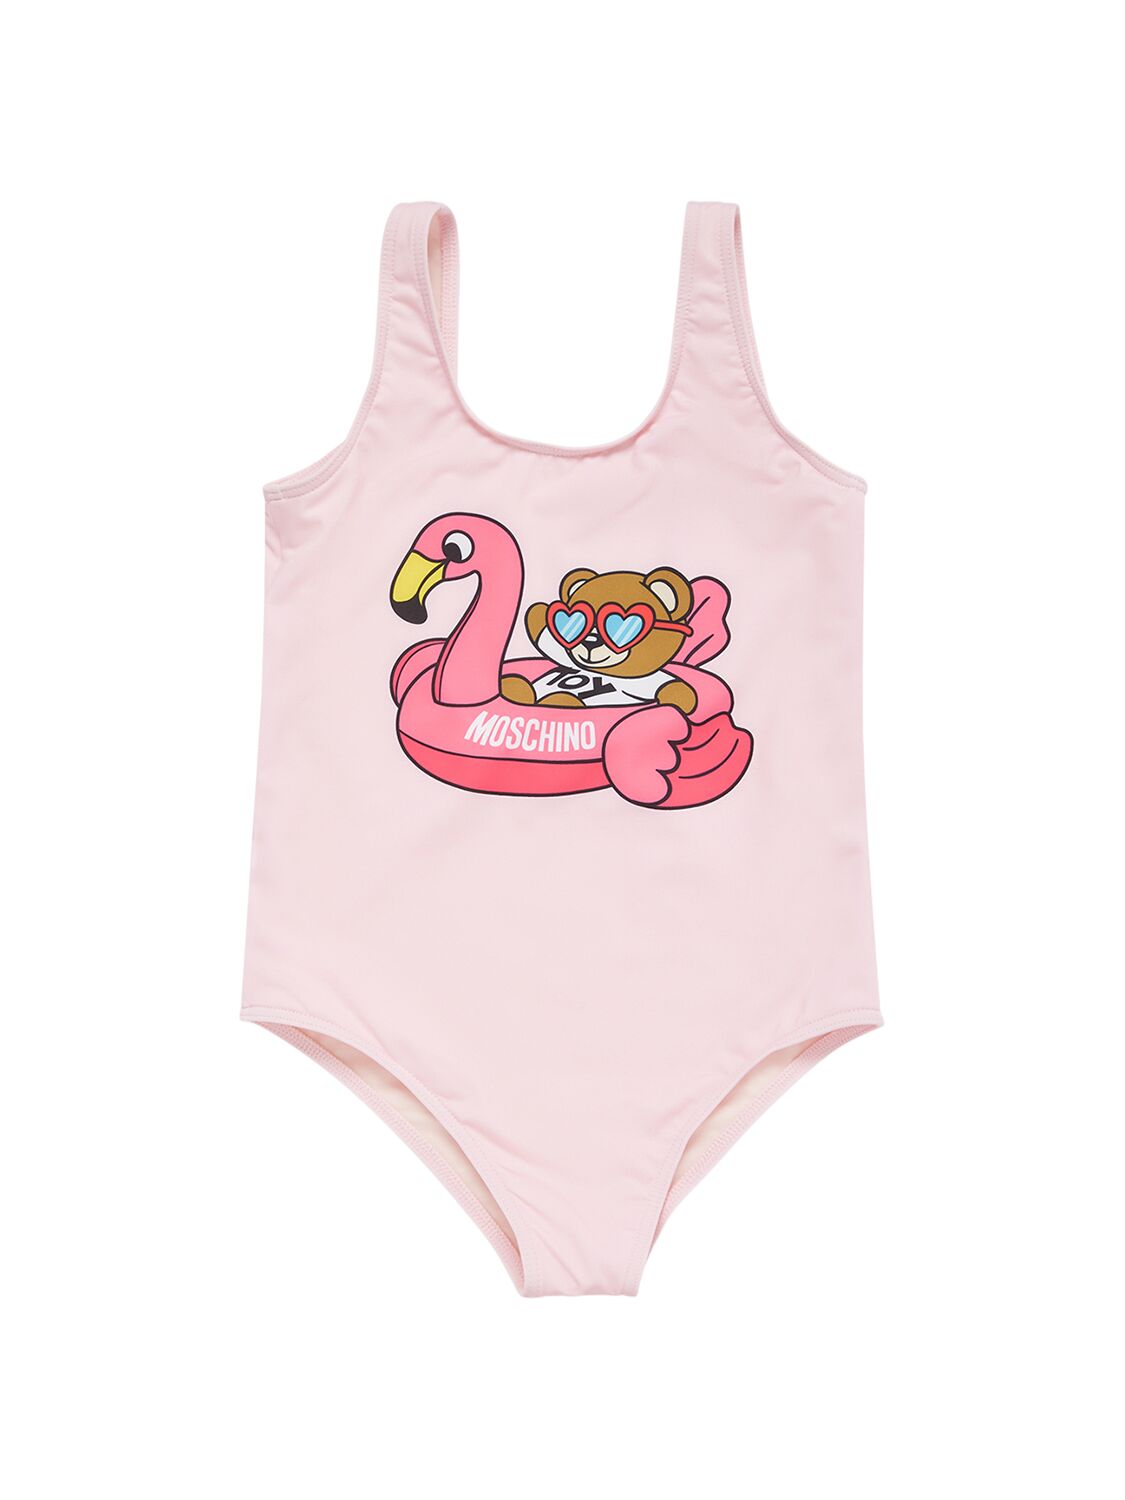 Moschino Kids' Lycra One Piece Swimsuit In Pink